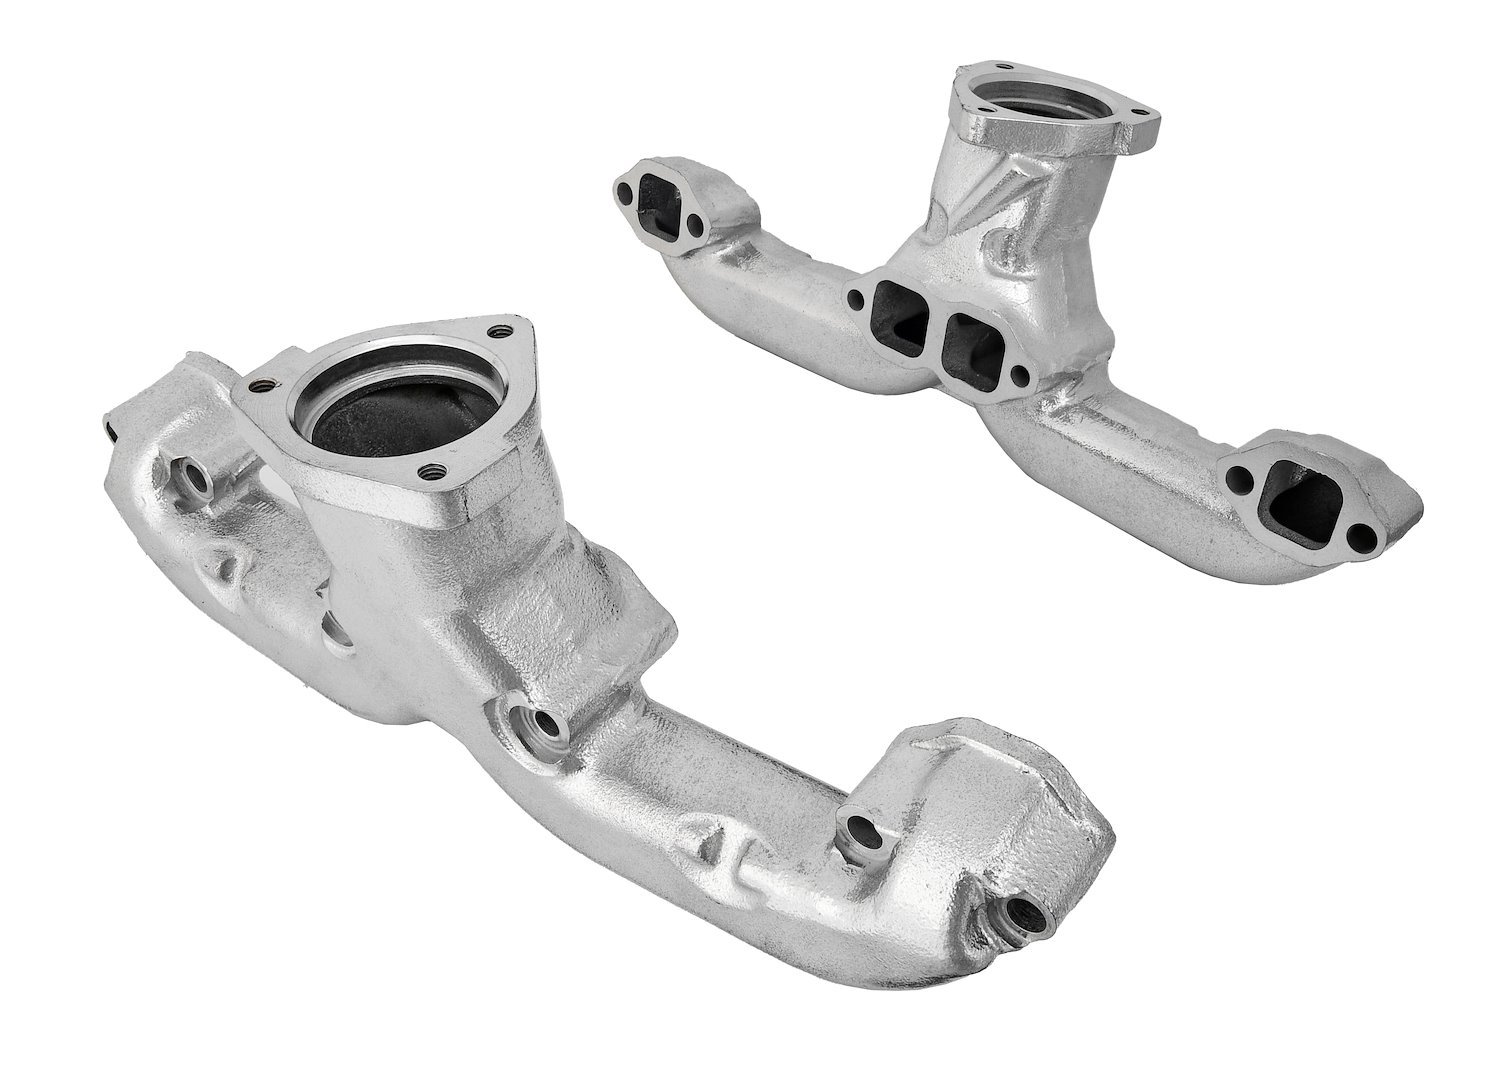 Silver Ceramic Coated Rams Horn Style Exhaust Manifolds [Fits Most Round/Square Port Small Block Chevy Stock Cylinder Heads]